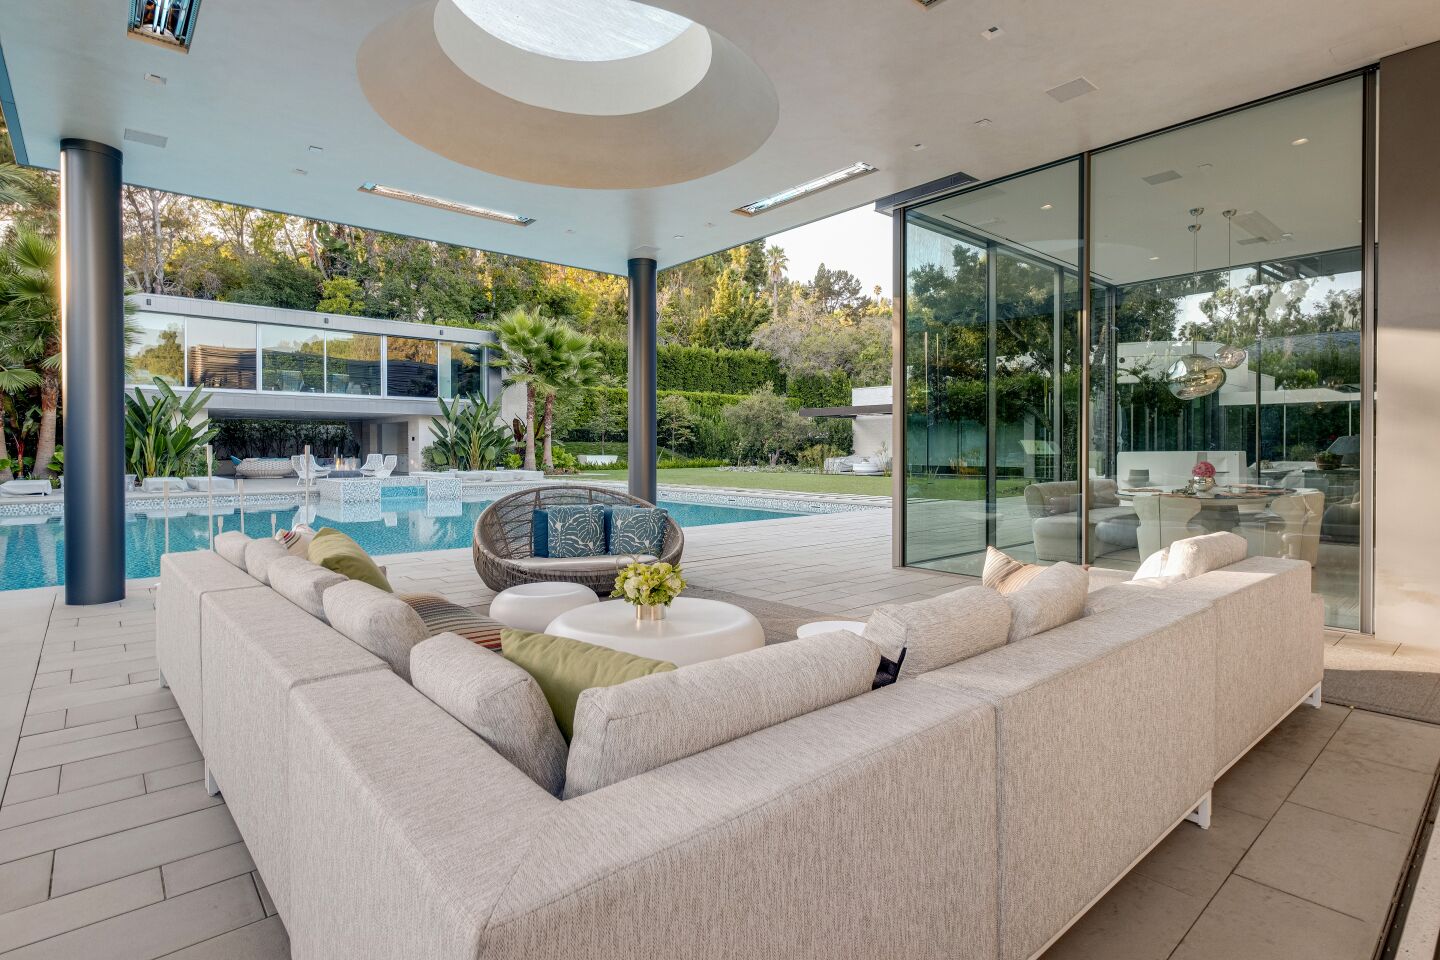 The home was designed for indoor-outdoor entertaining.